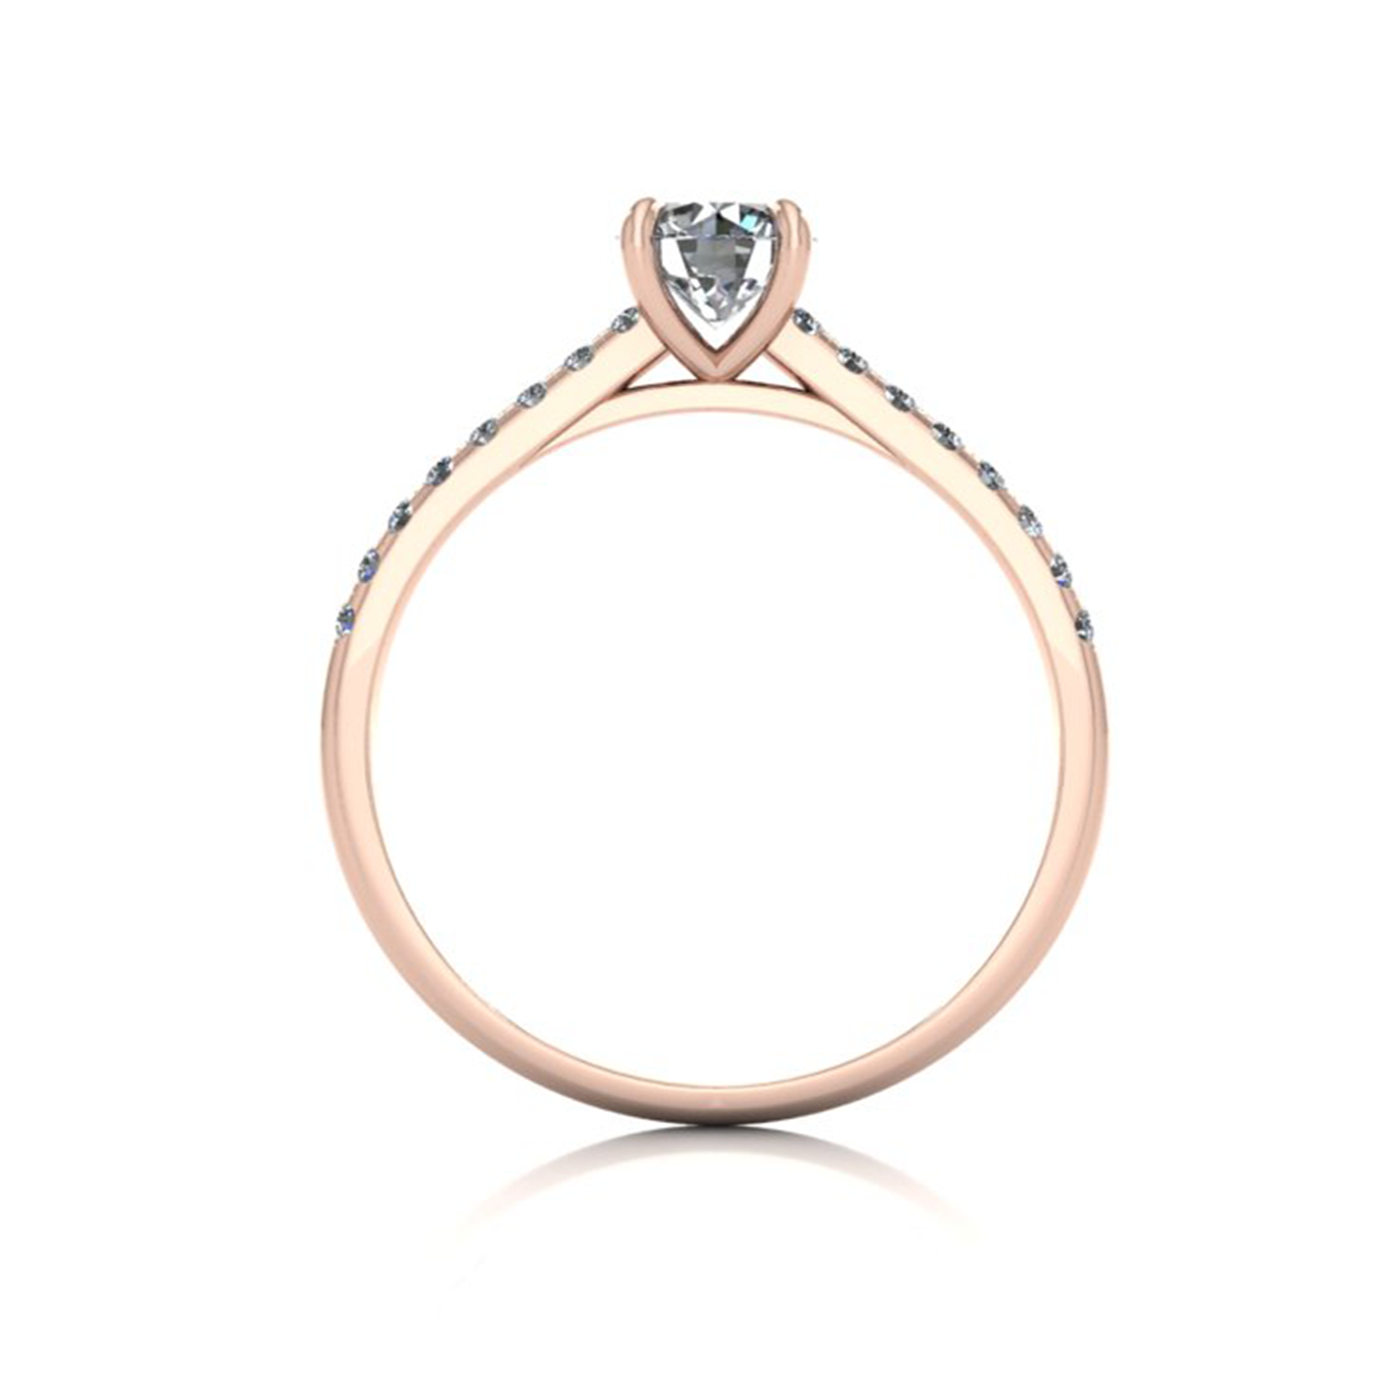 18k rose gold 0,50 ct 4 prongs round cut diamond engagement ring with whisper thin pavÉ set band